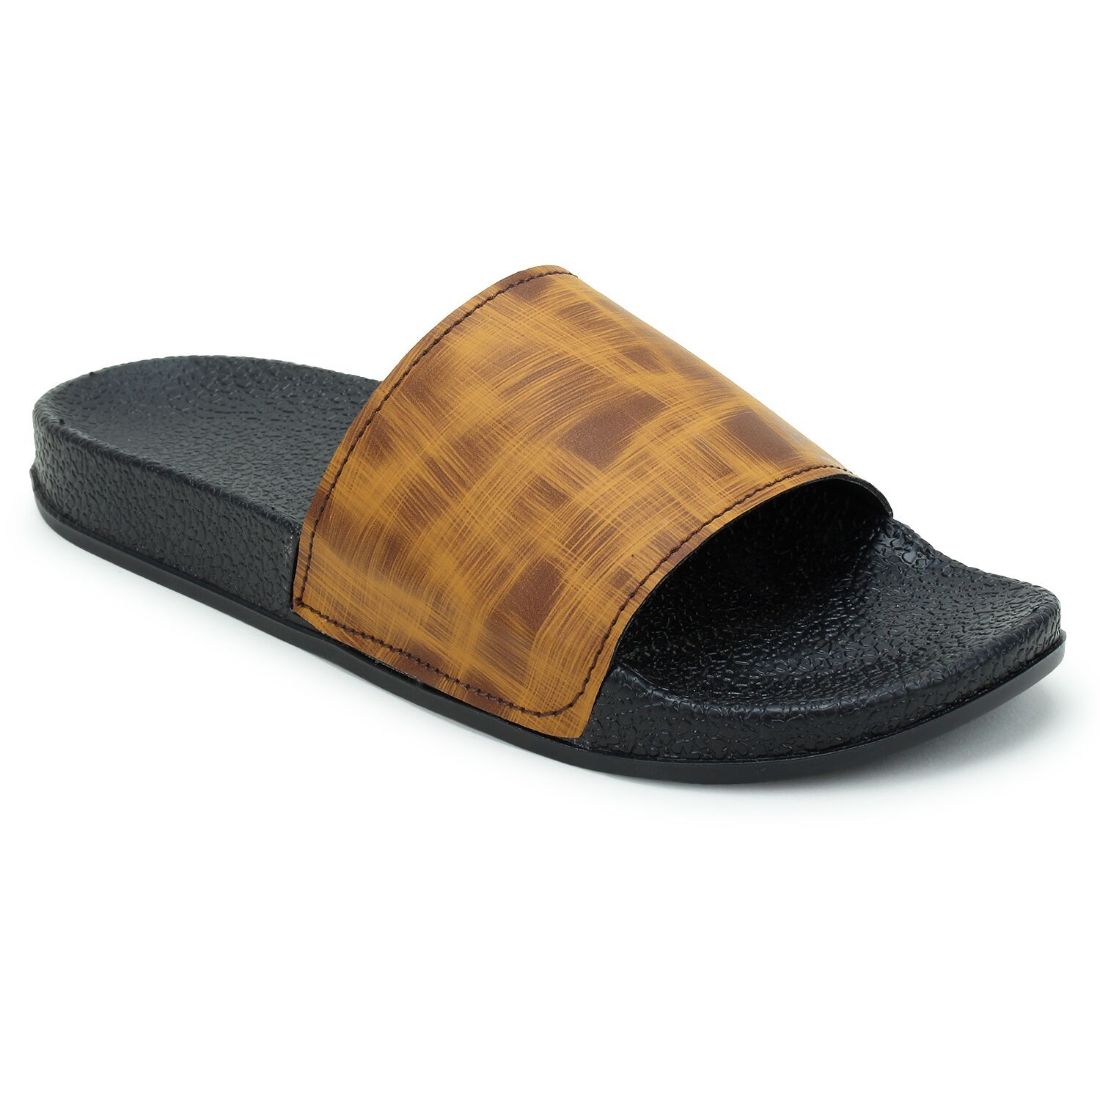  Women Tan Brown Color Synthetic Material  Casual Sliders